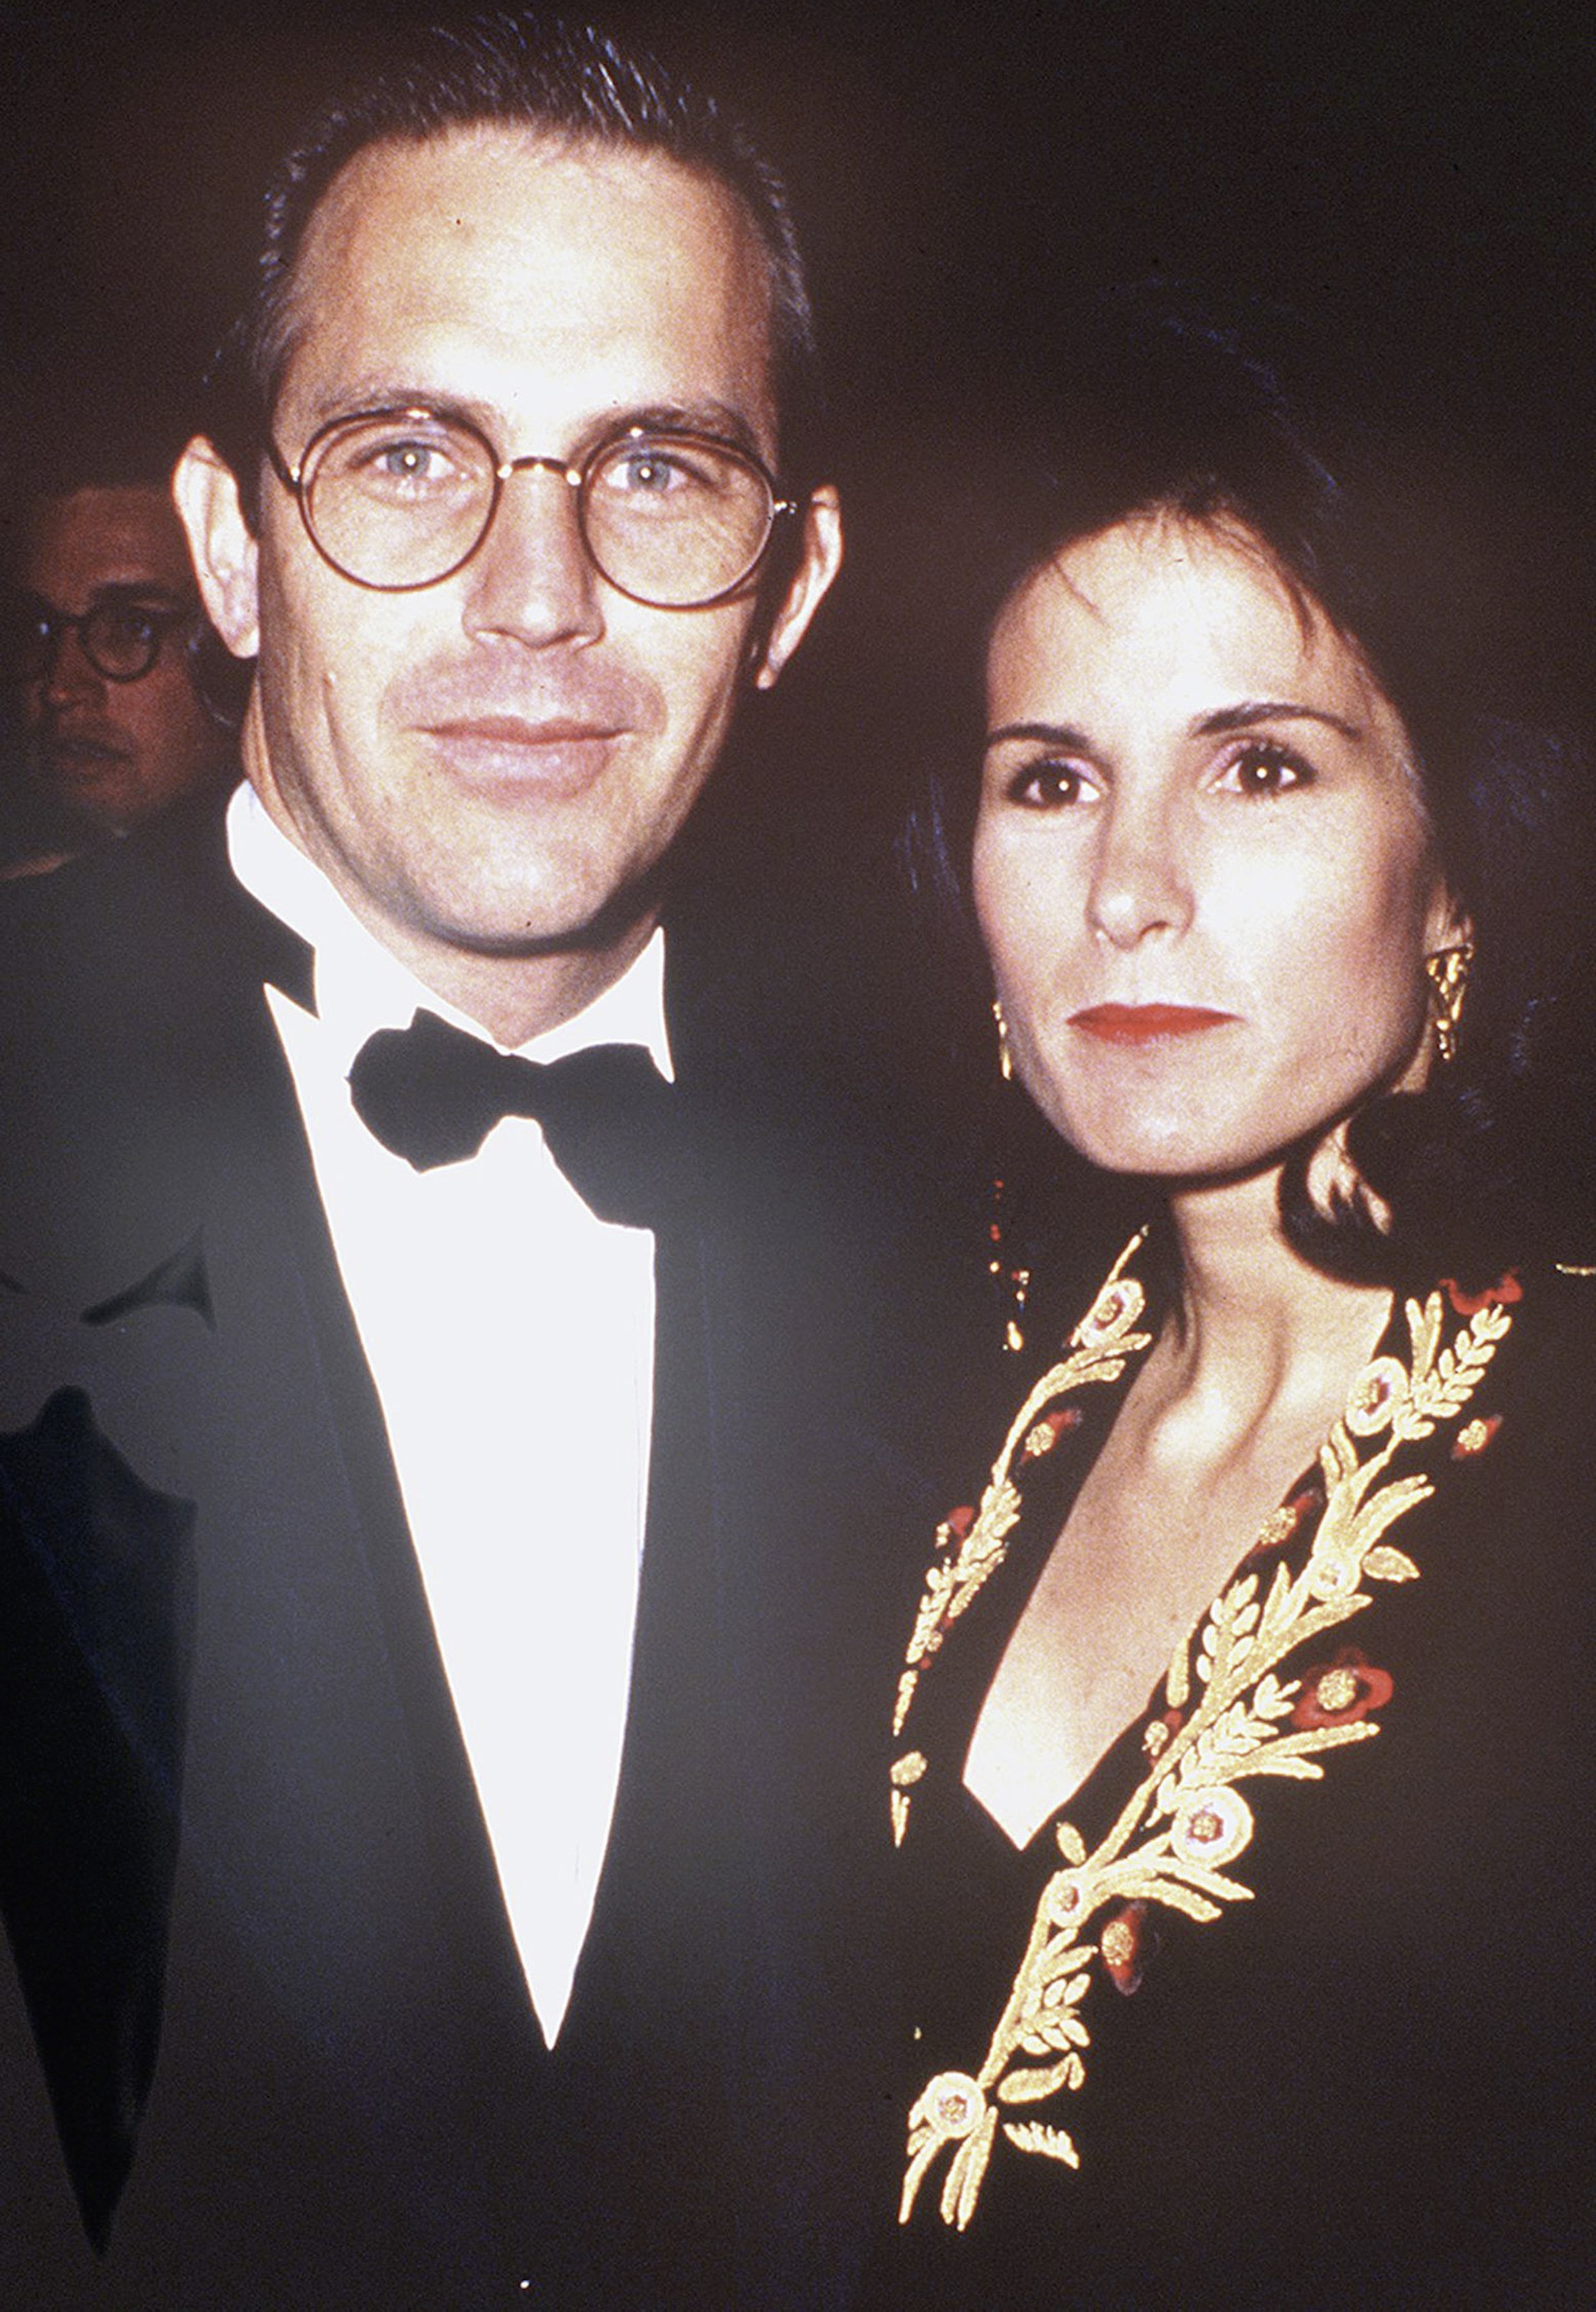 American actress Cindy Costner and musician Kevin Costner attend the "Dances With Wolves" Los Angeles premiere at Cineplex Odeon Cinema on November 4, 1990 in Los Angeles, California | Source: Getty Images